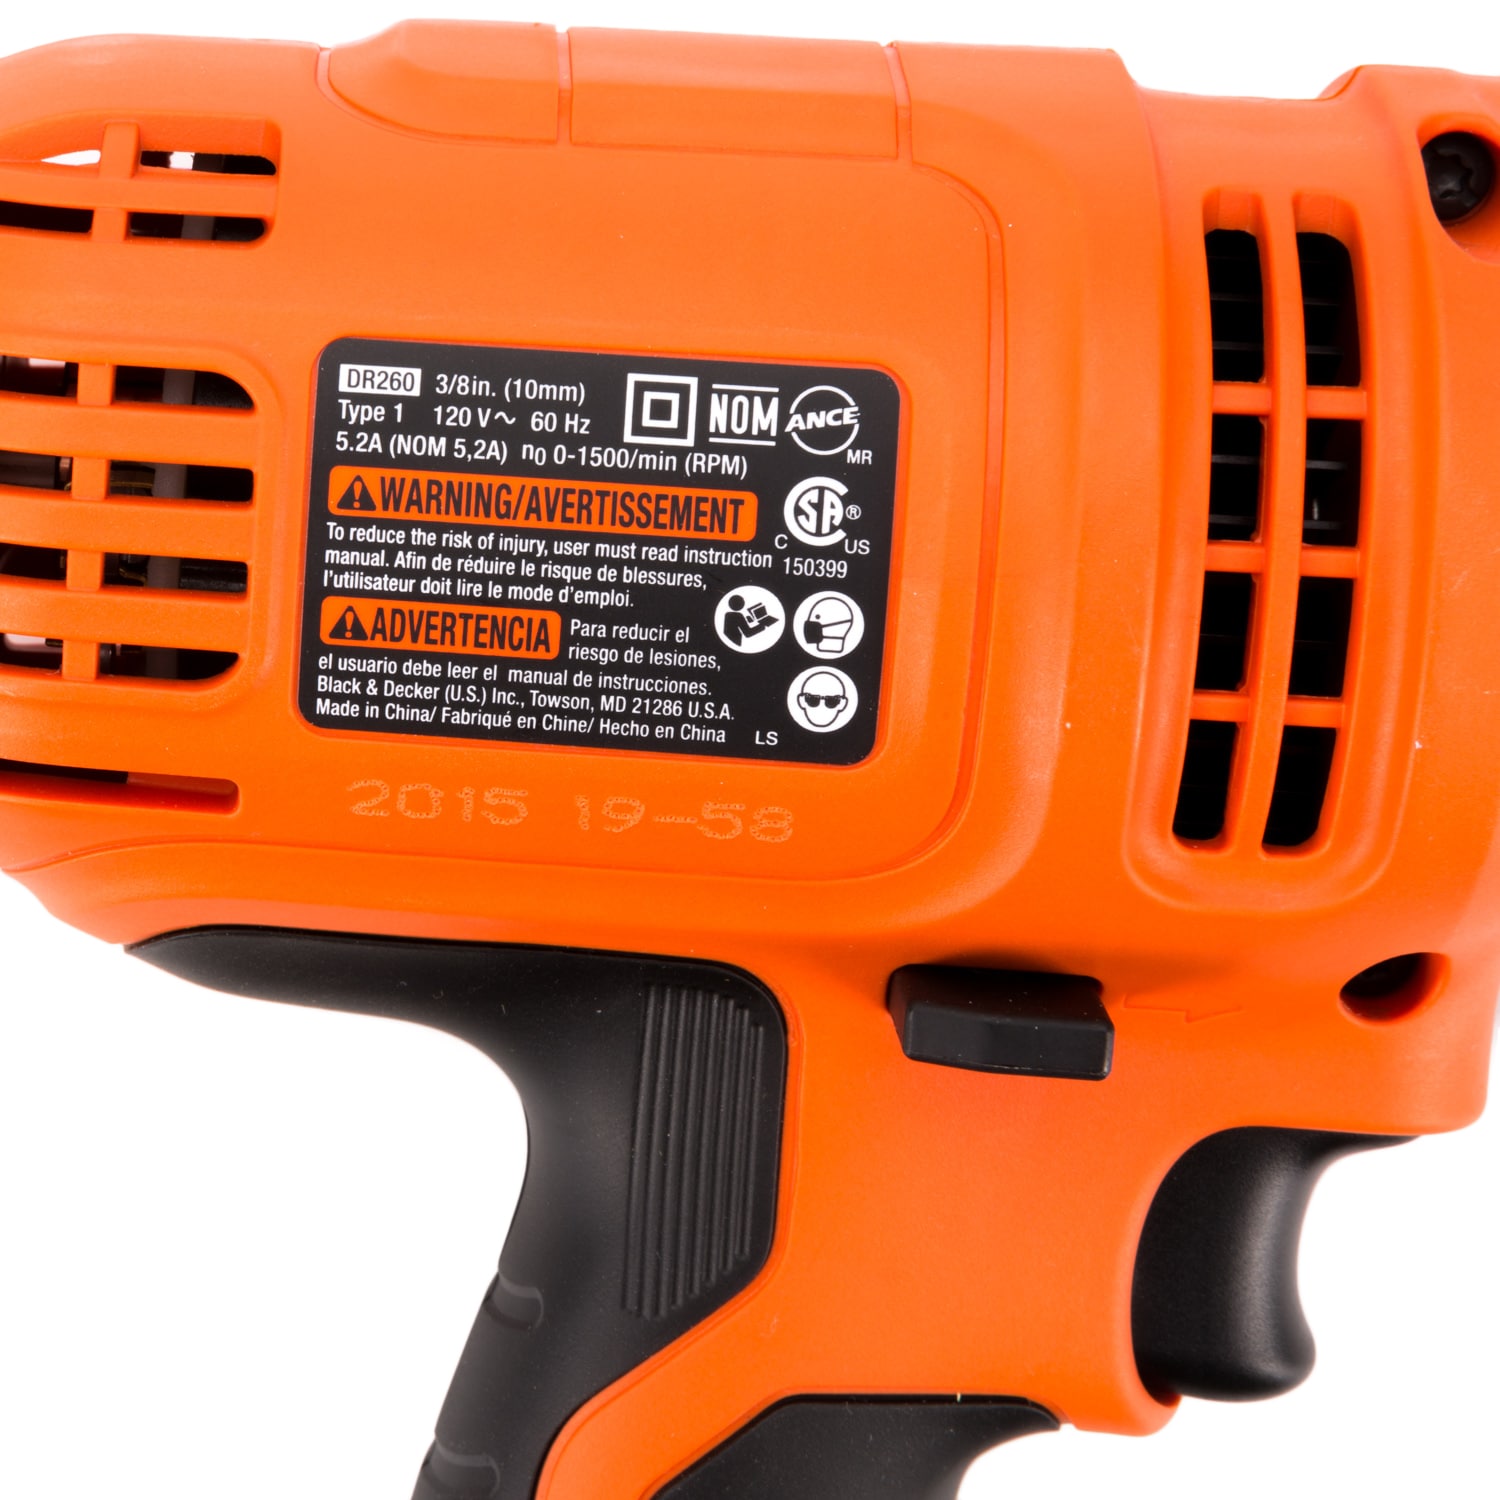 BLACK+DECKER 3/8-in Keyless Corded Drill in the Drills department